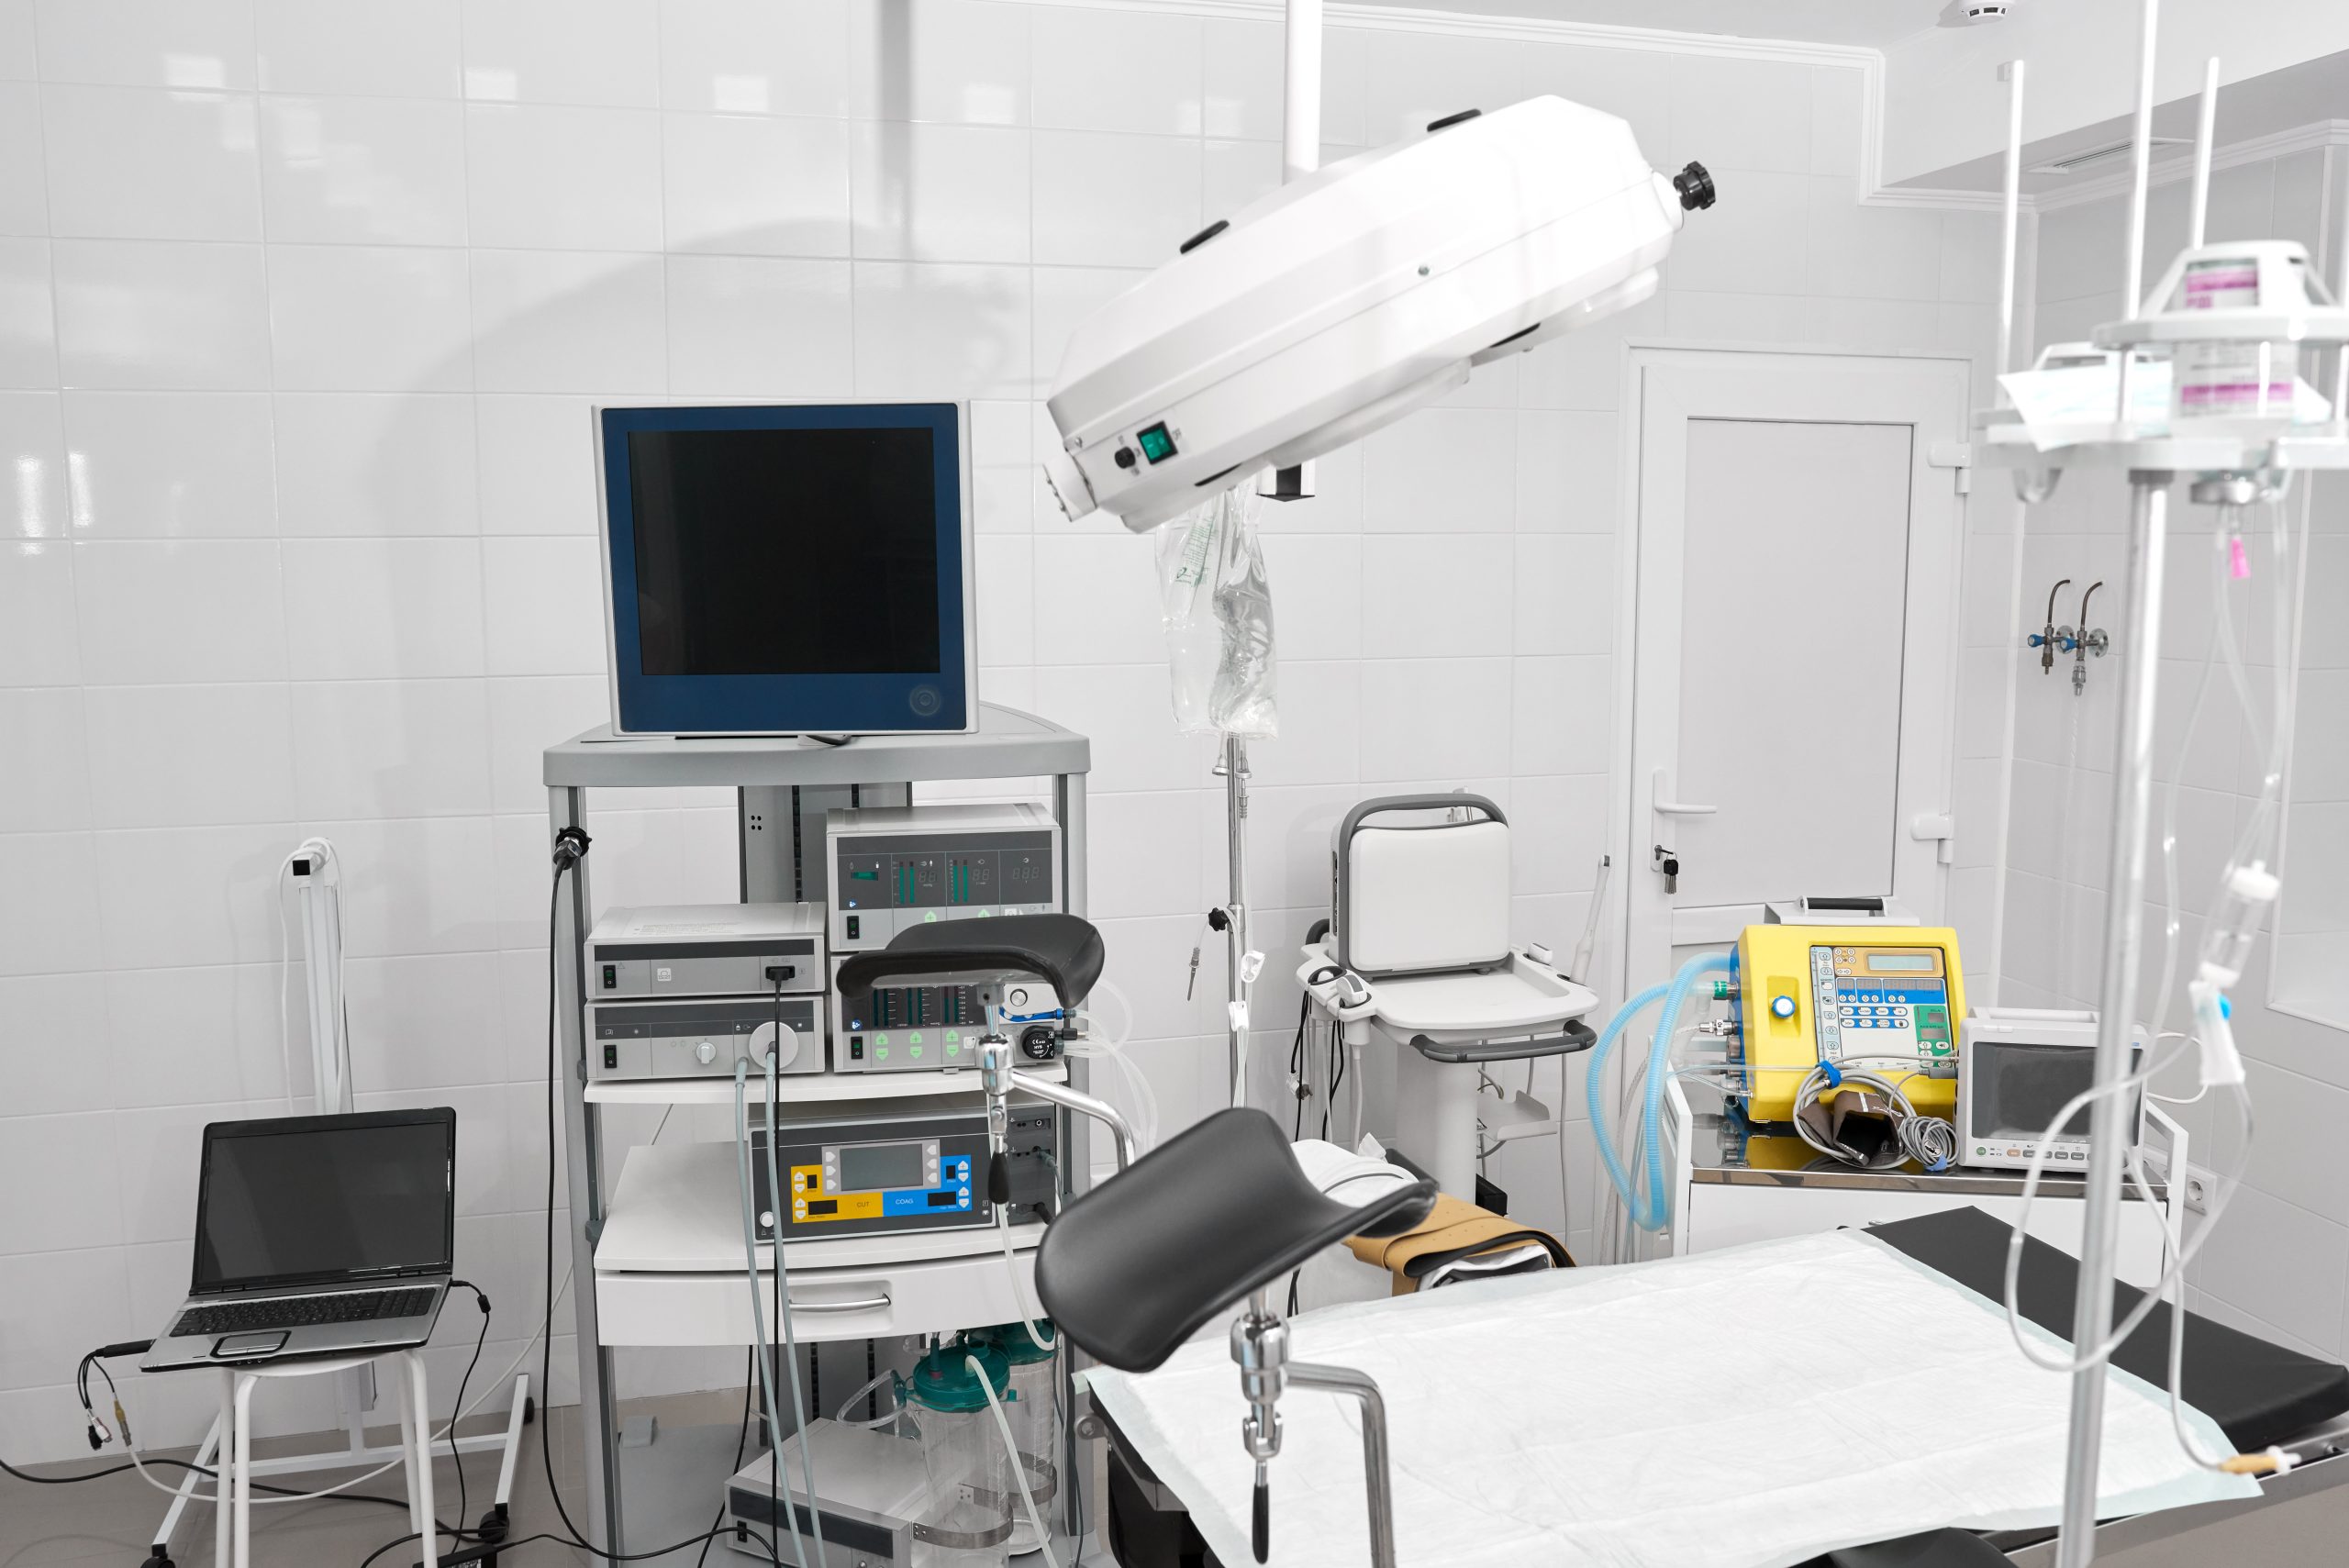 Shot of a gynecological room with chair for medical examinations and equipment medicine feminine health profession clinical hospital examine concept.